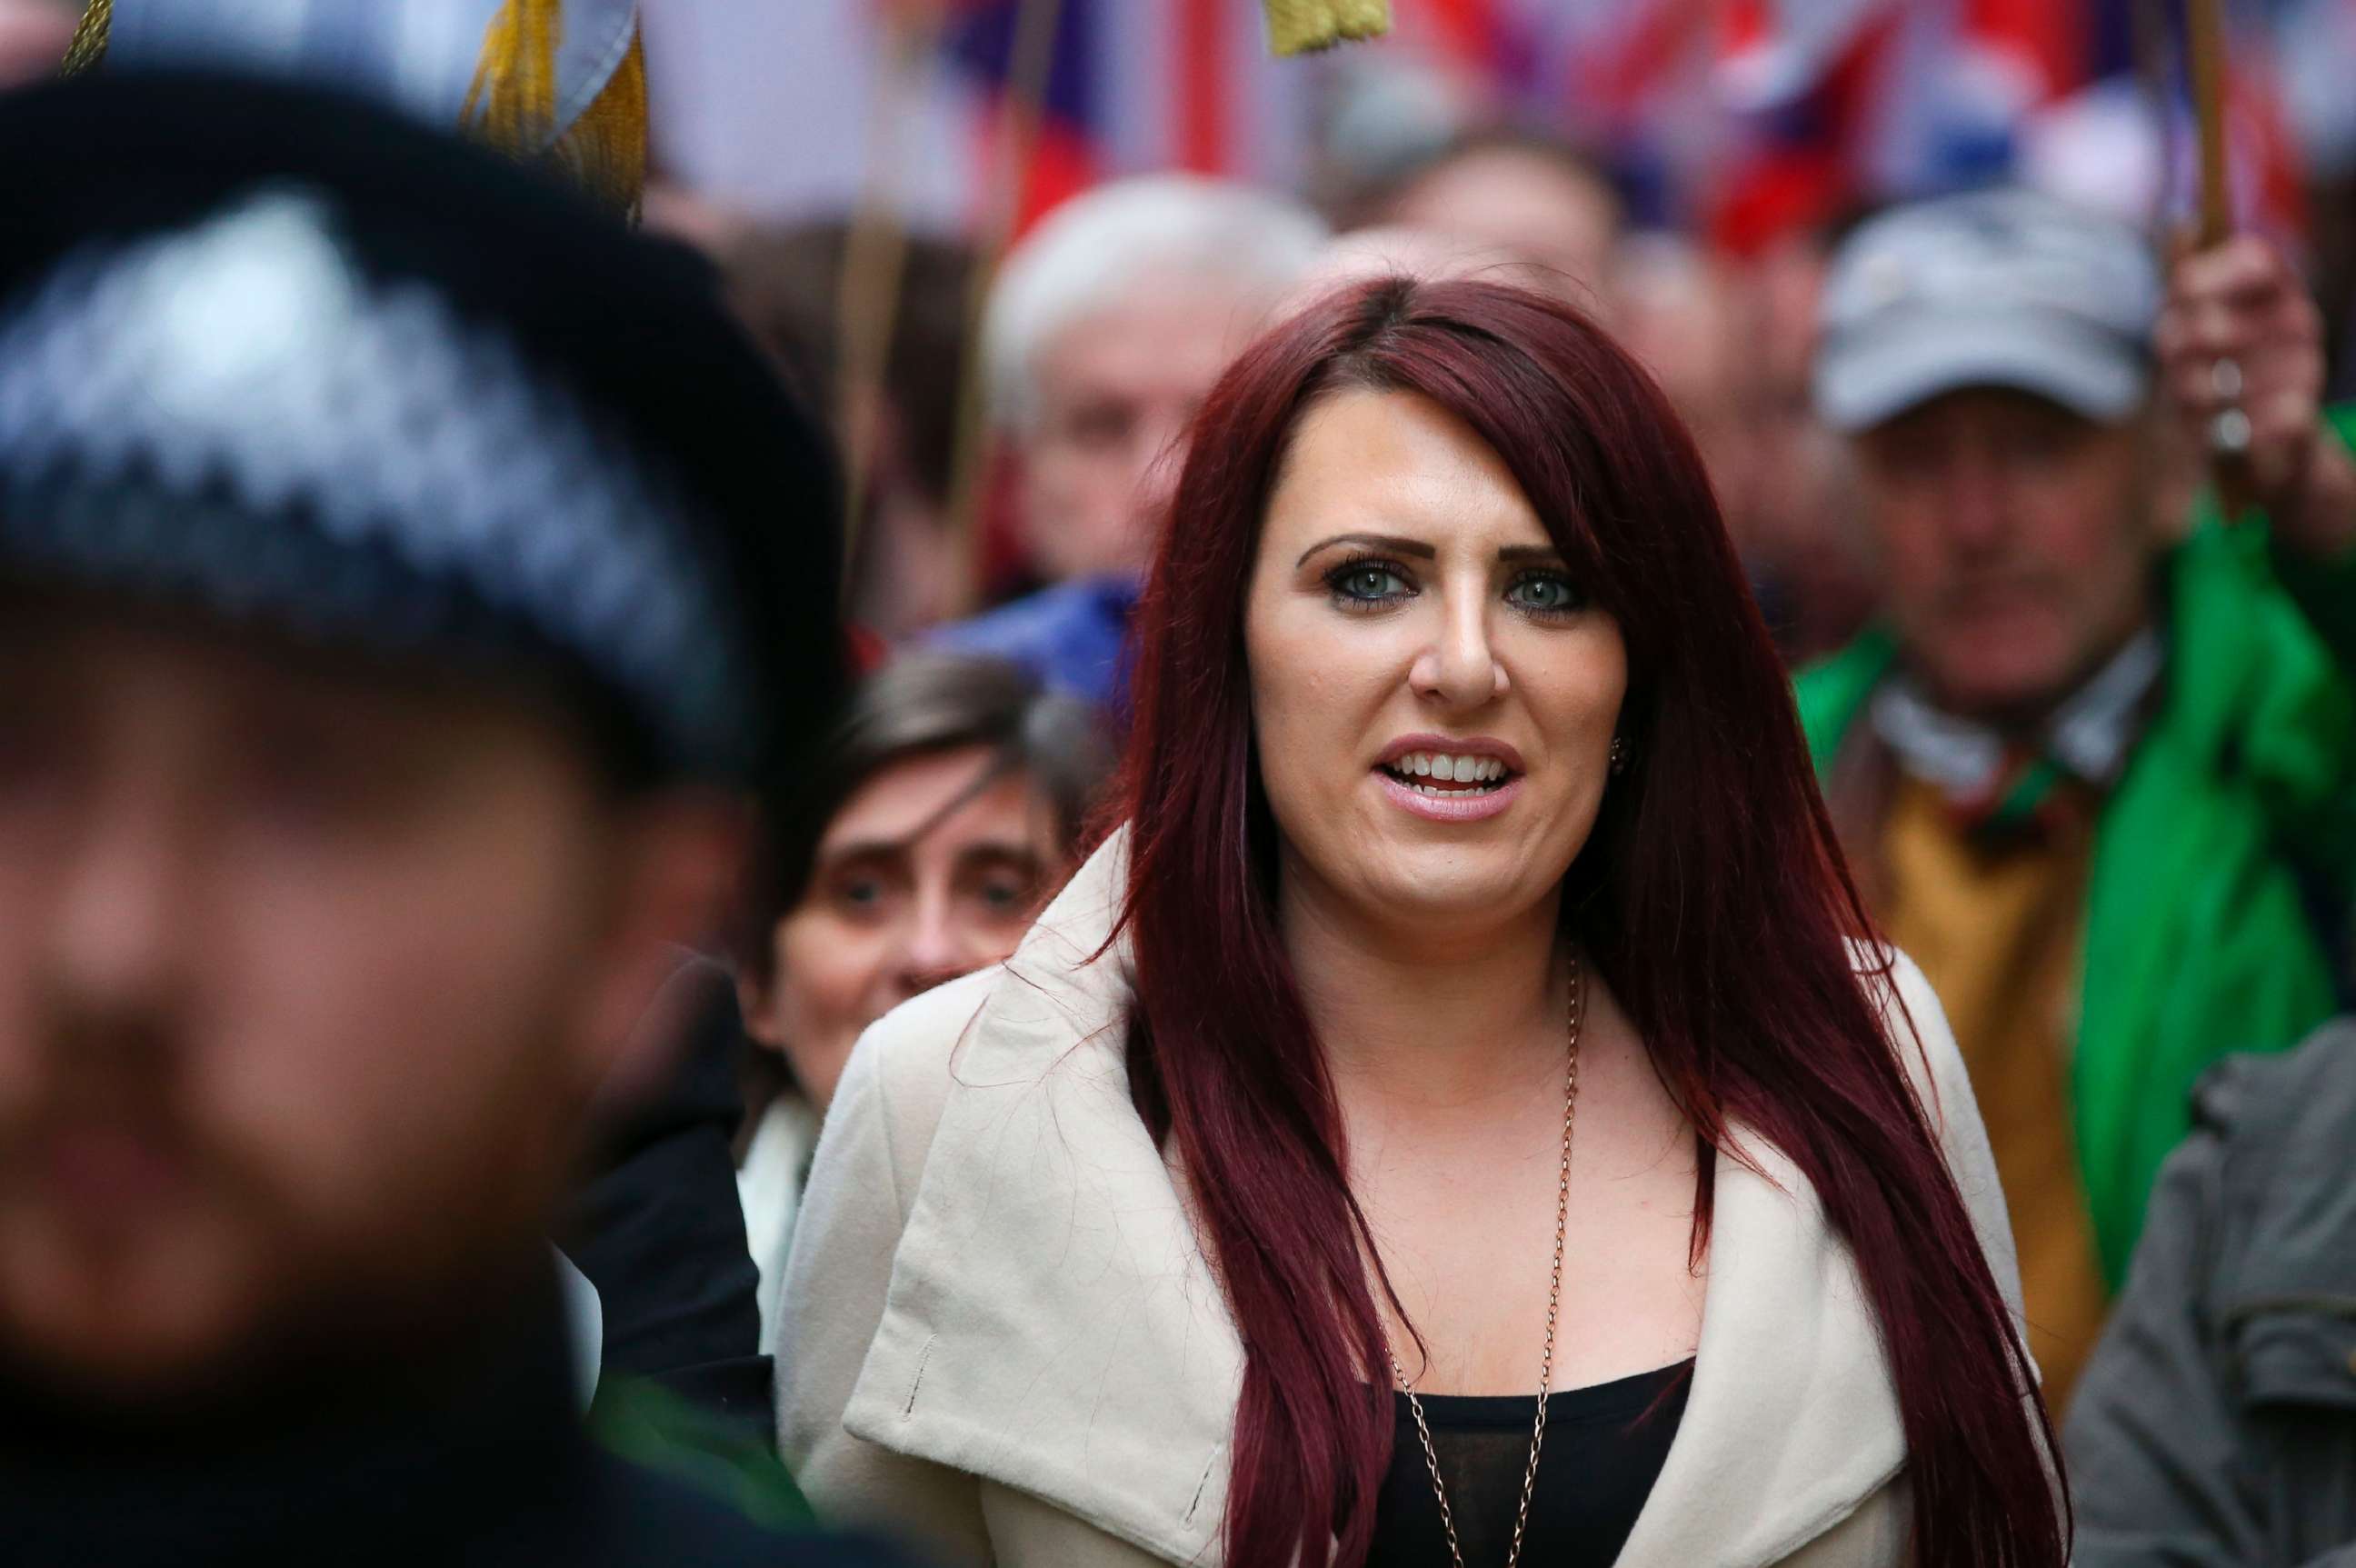 PHOTO: Jayda Fransen, acting leader of the far-right organisation Britain First marches in central London on April 1, 2017.
